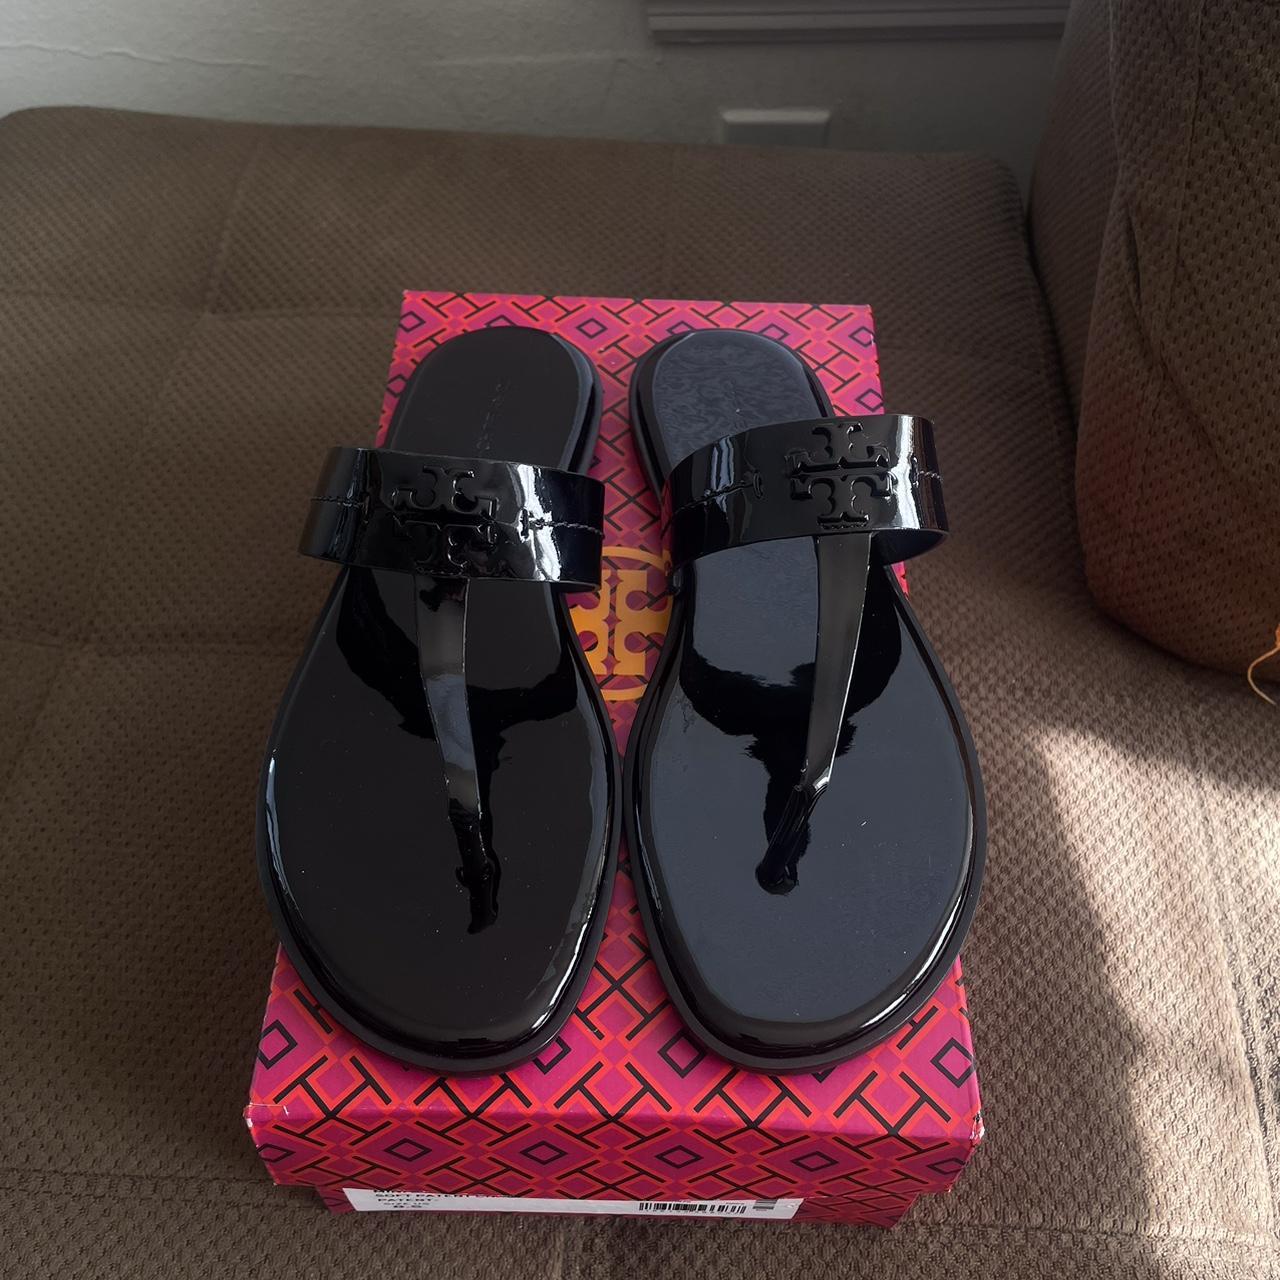 Tory Burch Jelly Bow Thong Sandals in Pink